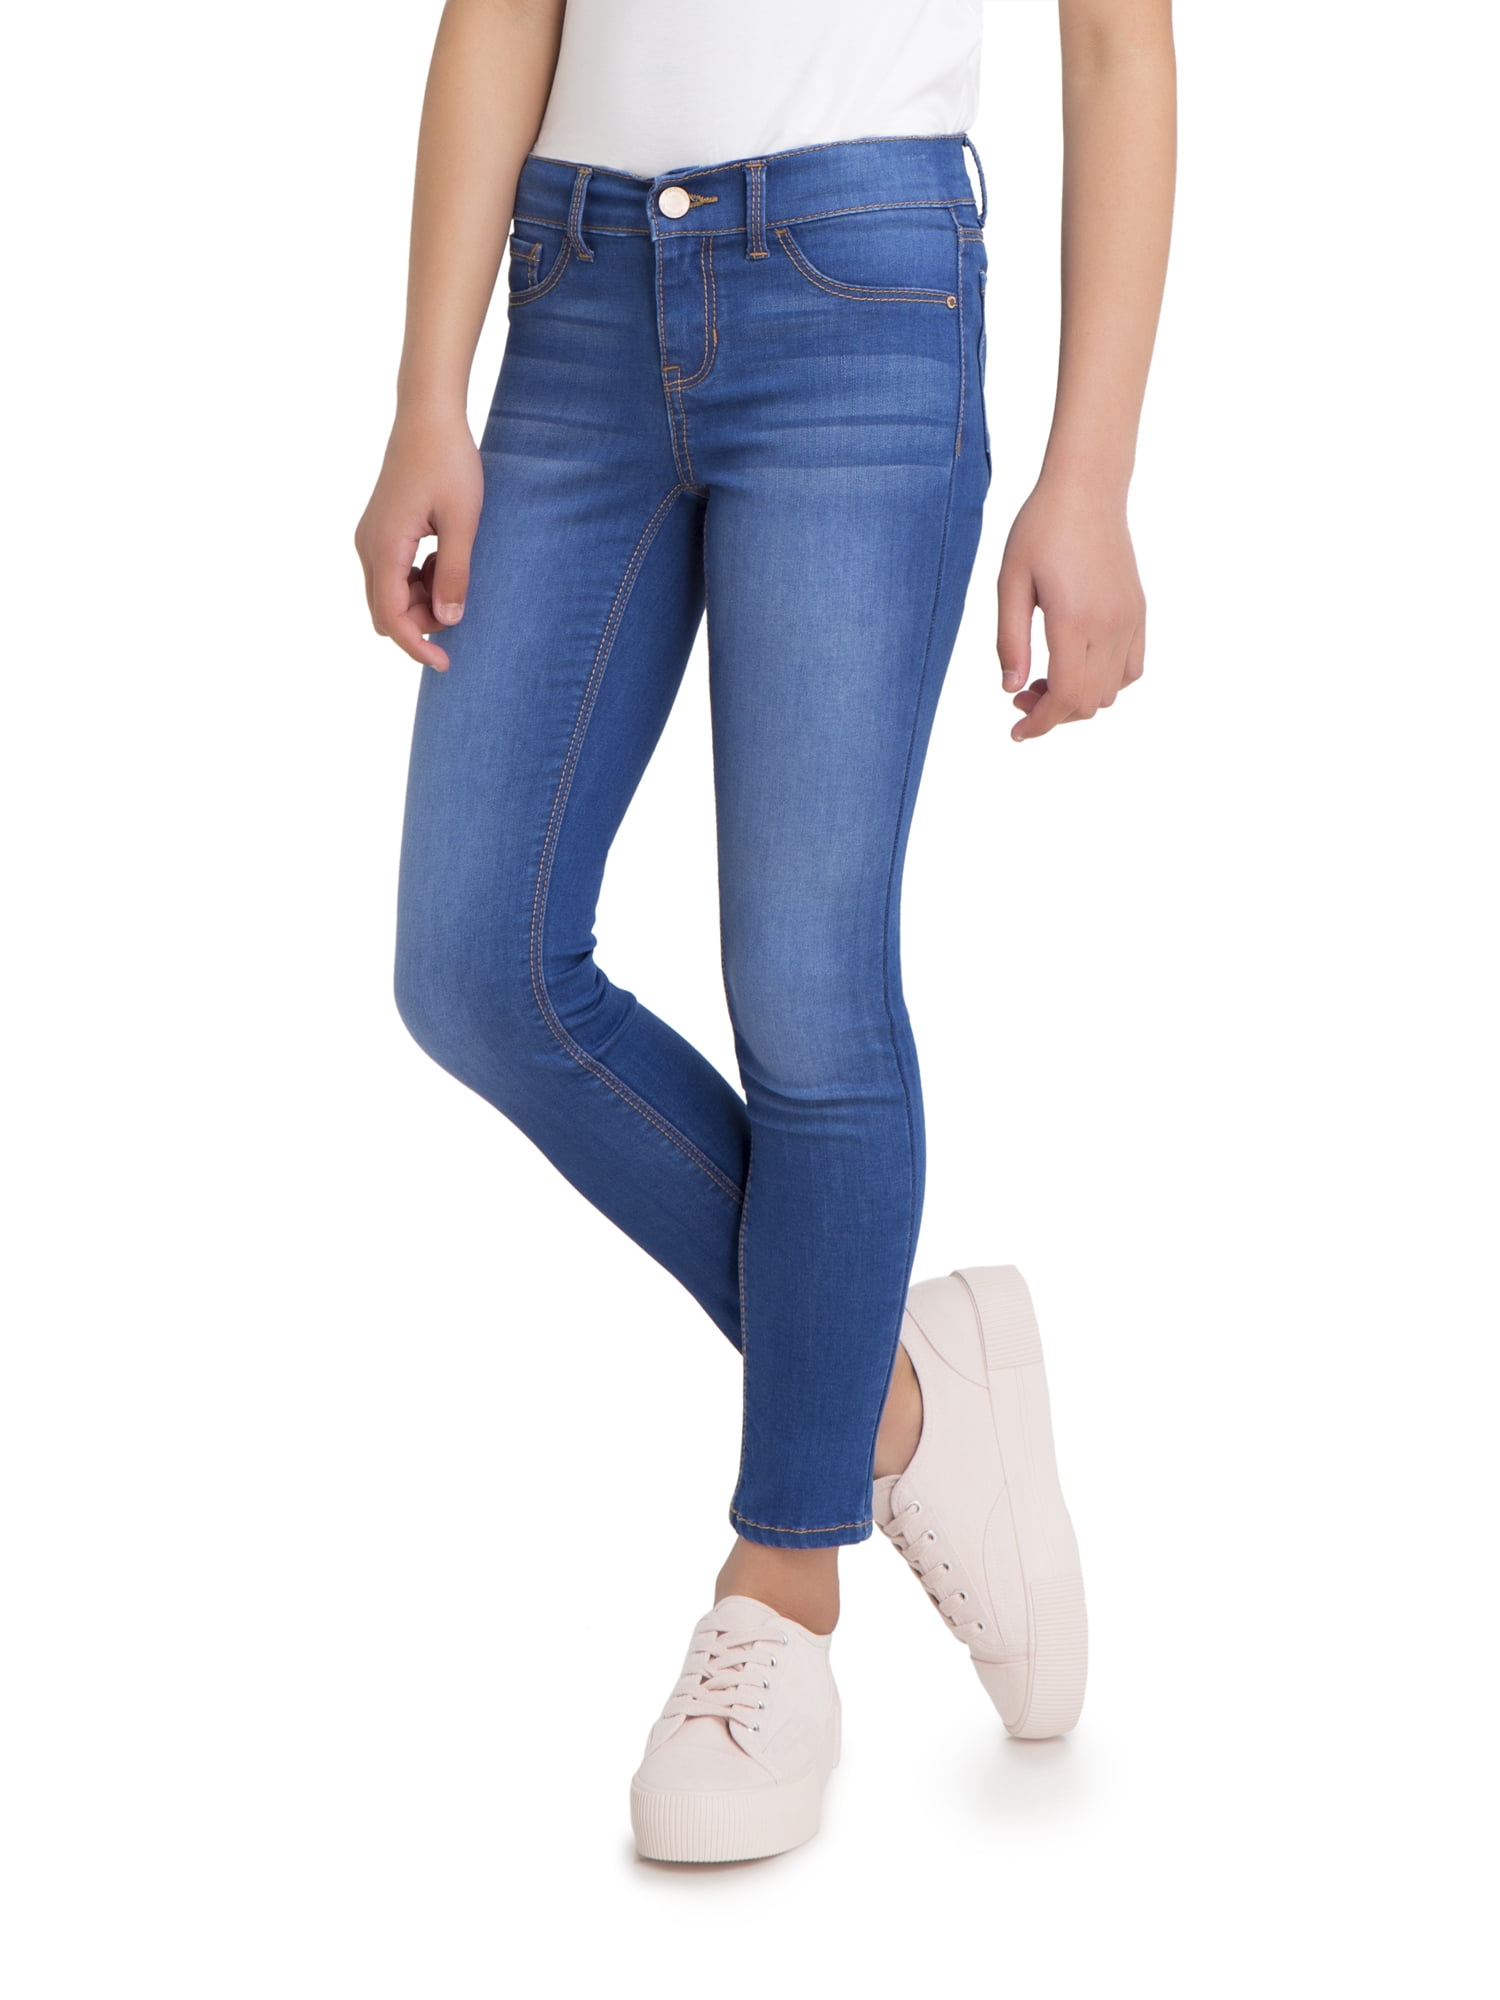 Girls Super Skinny Stretch Jeans 7 for all mankind 6 